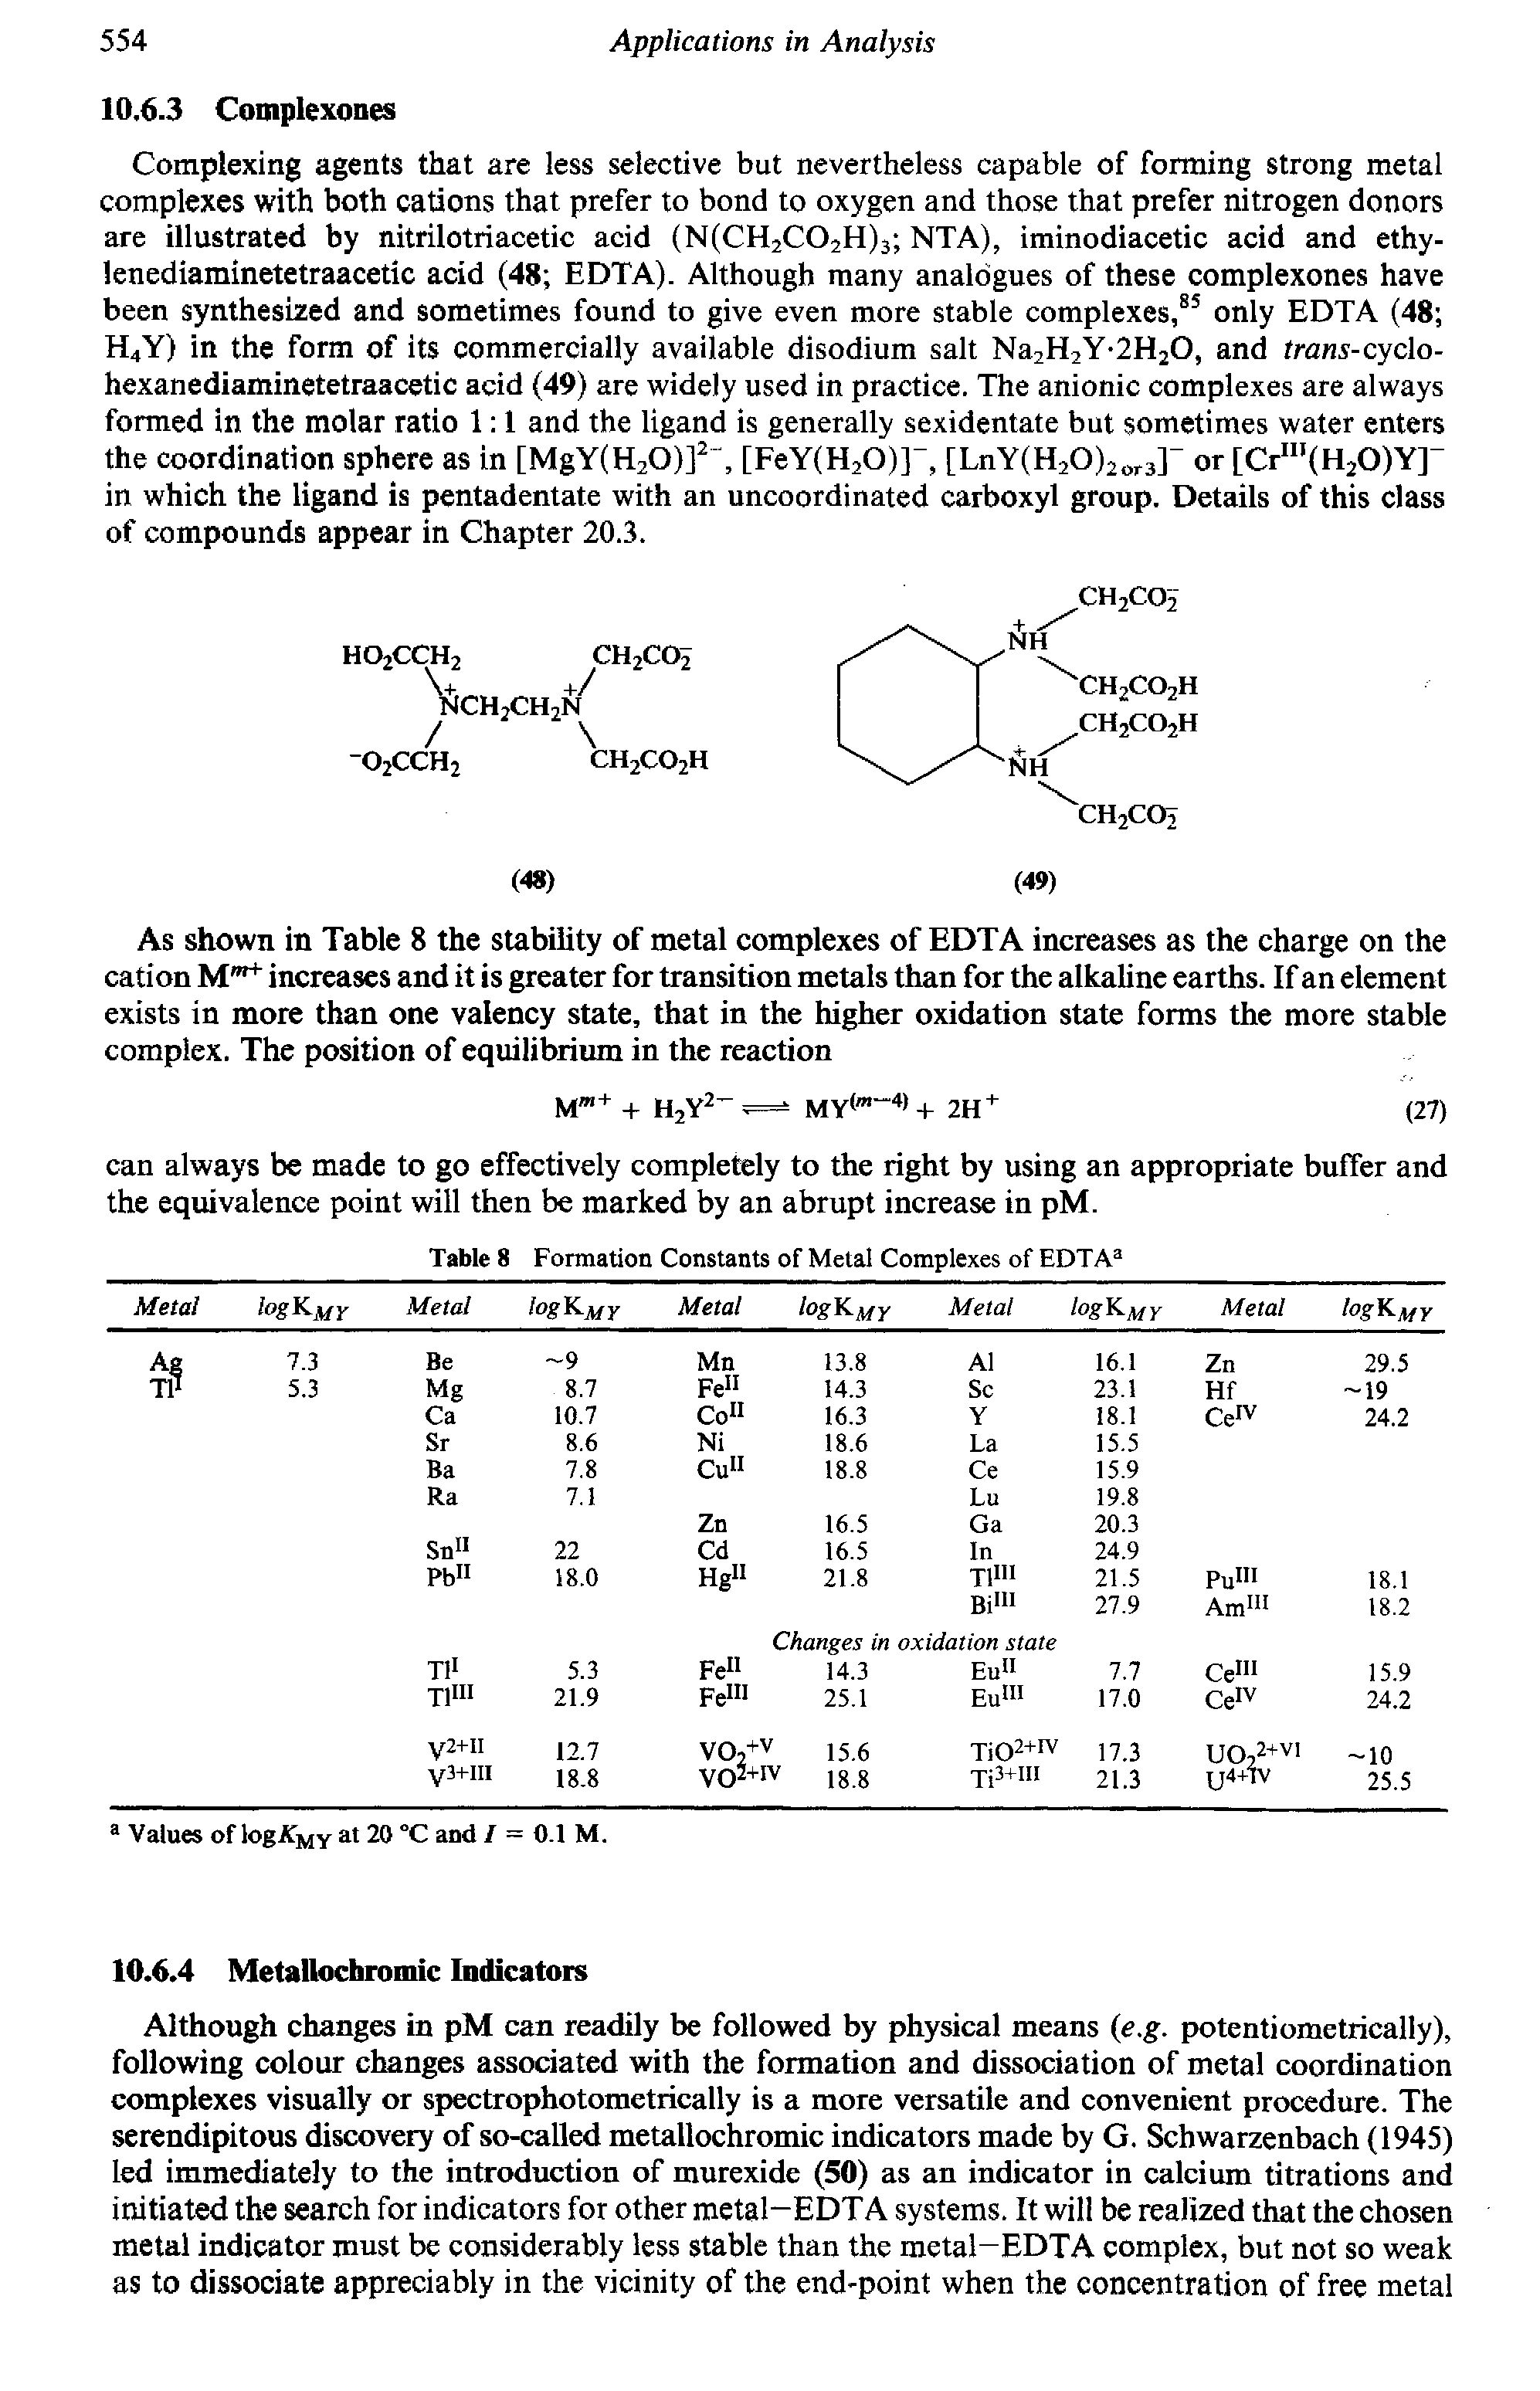 Table 8 Formation Constants of Metal Complexes of EDTA ...